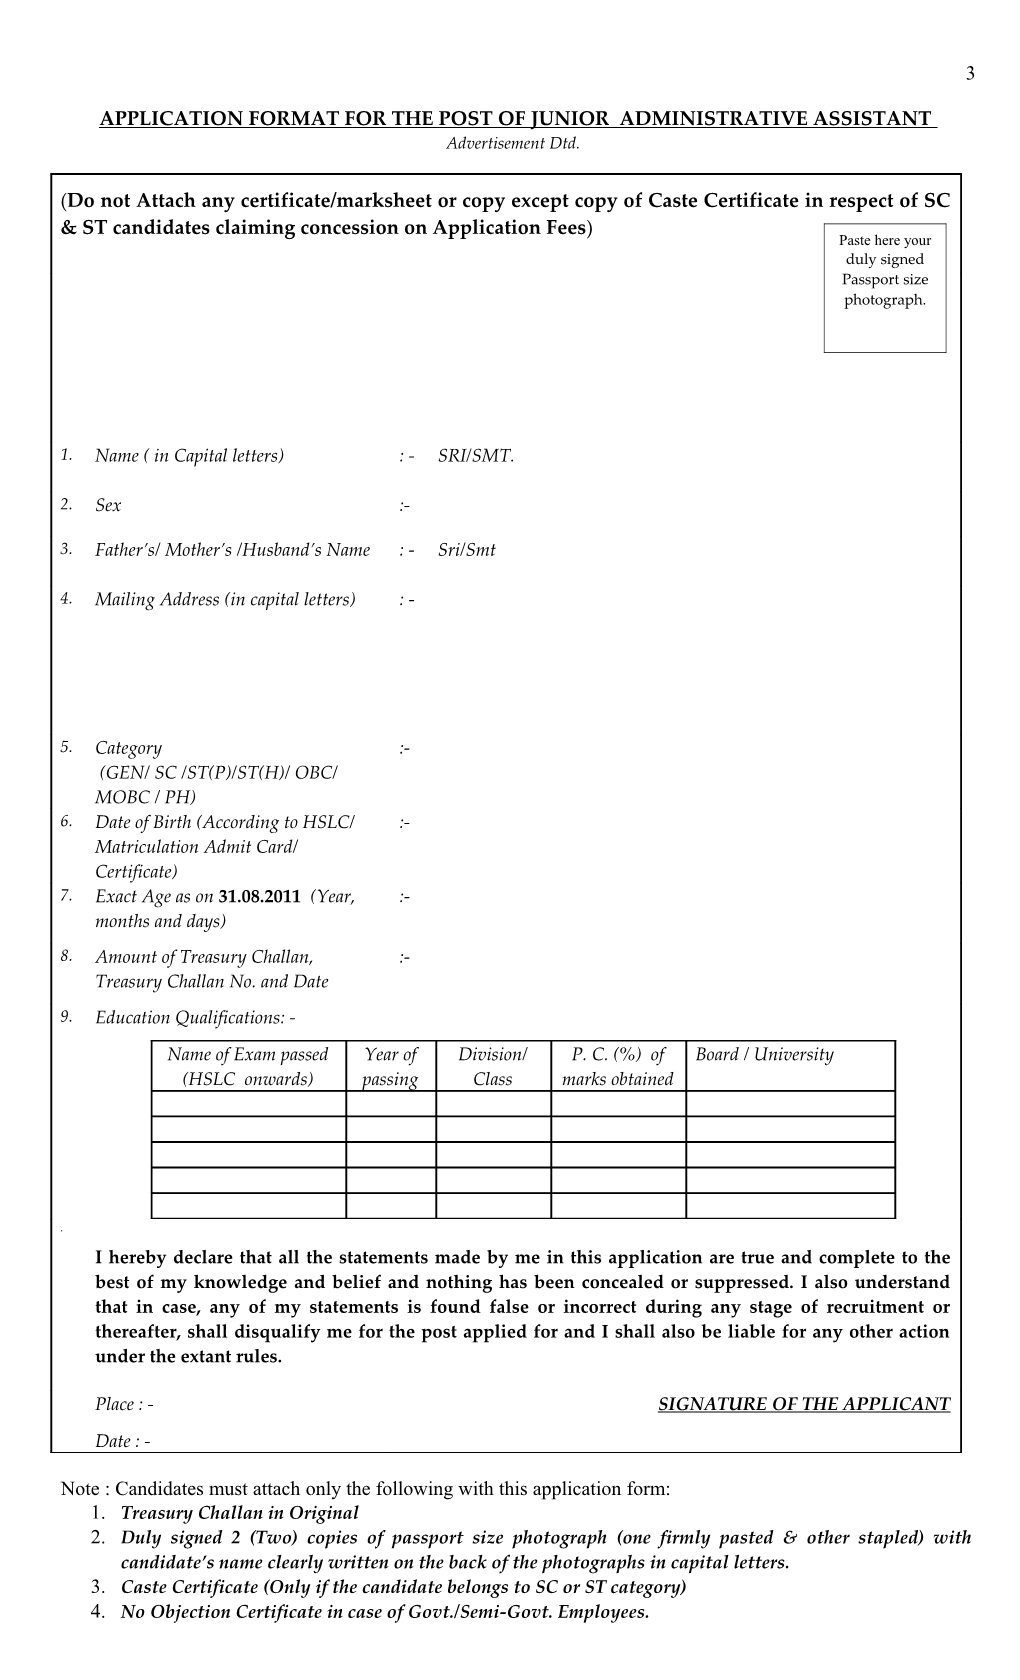 Application Format for the Post of Junior Administrative Assistant